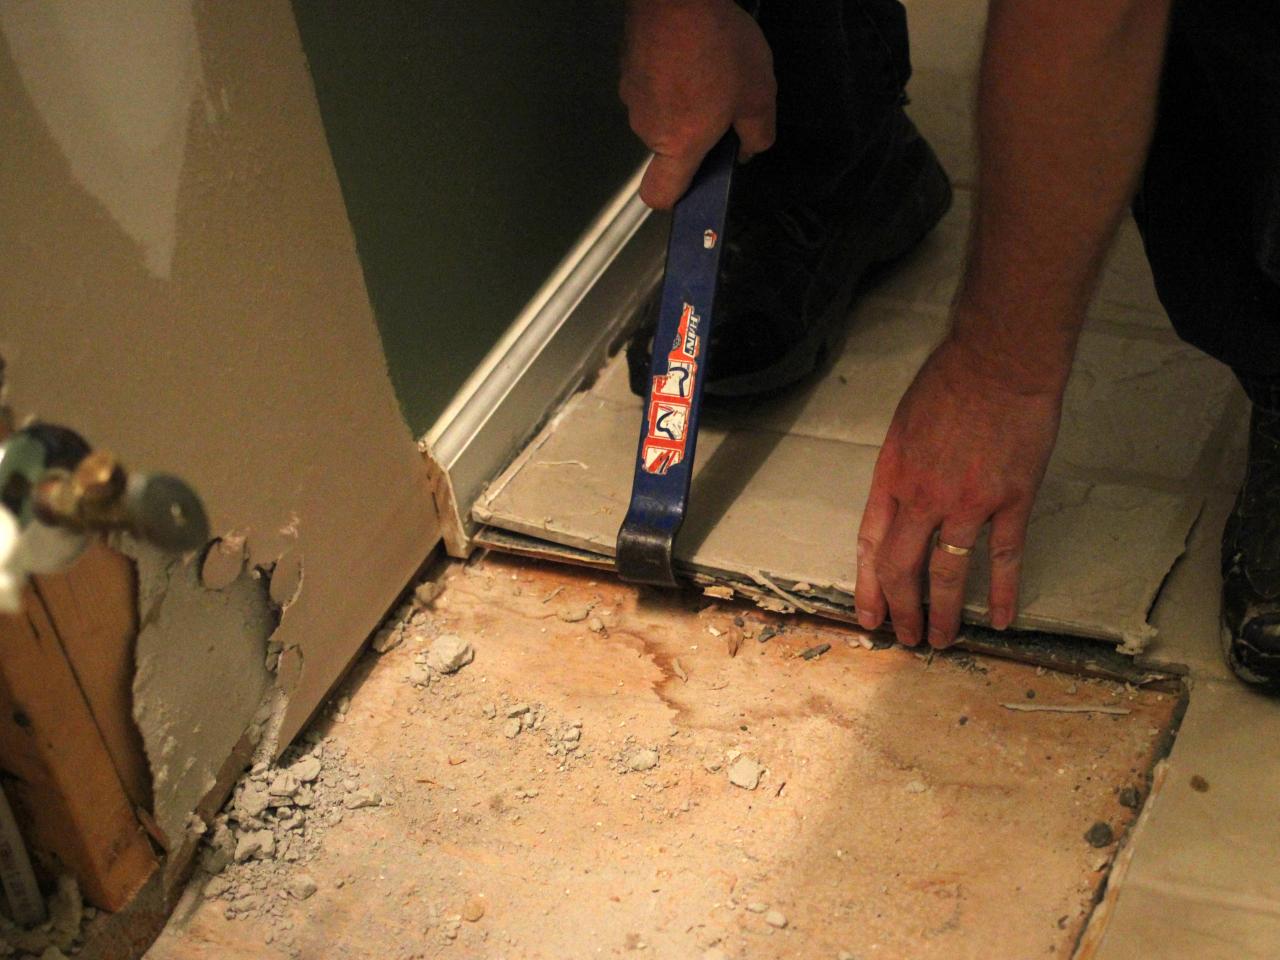 How To Remove A Tile Floor, How To Remove Ceramic Floor Tile From Concrete